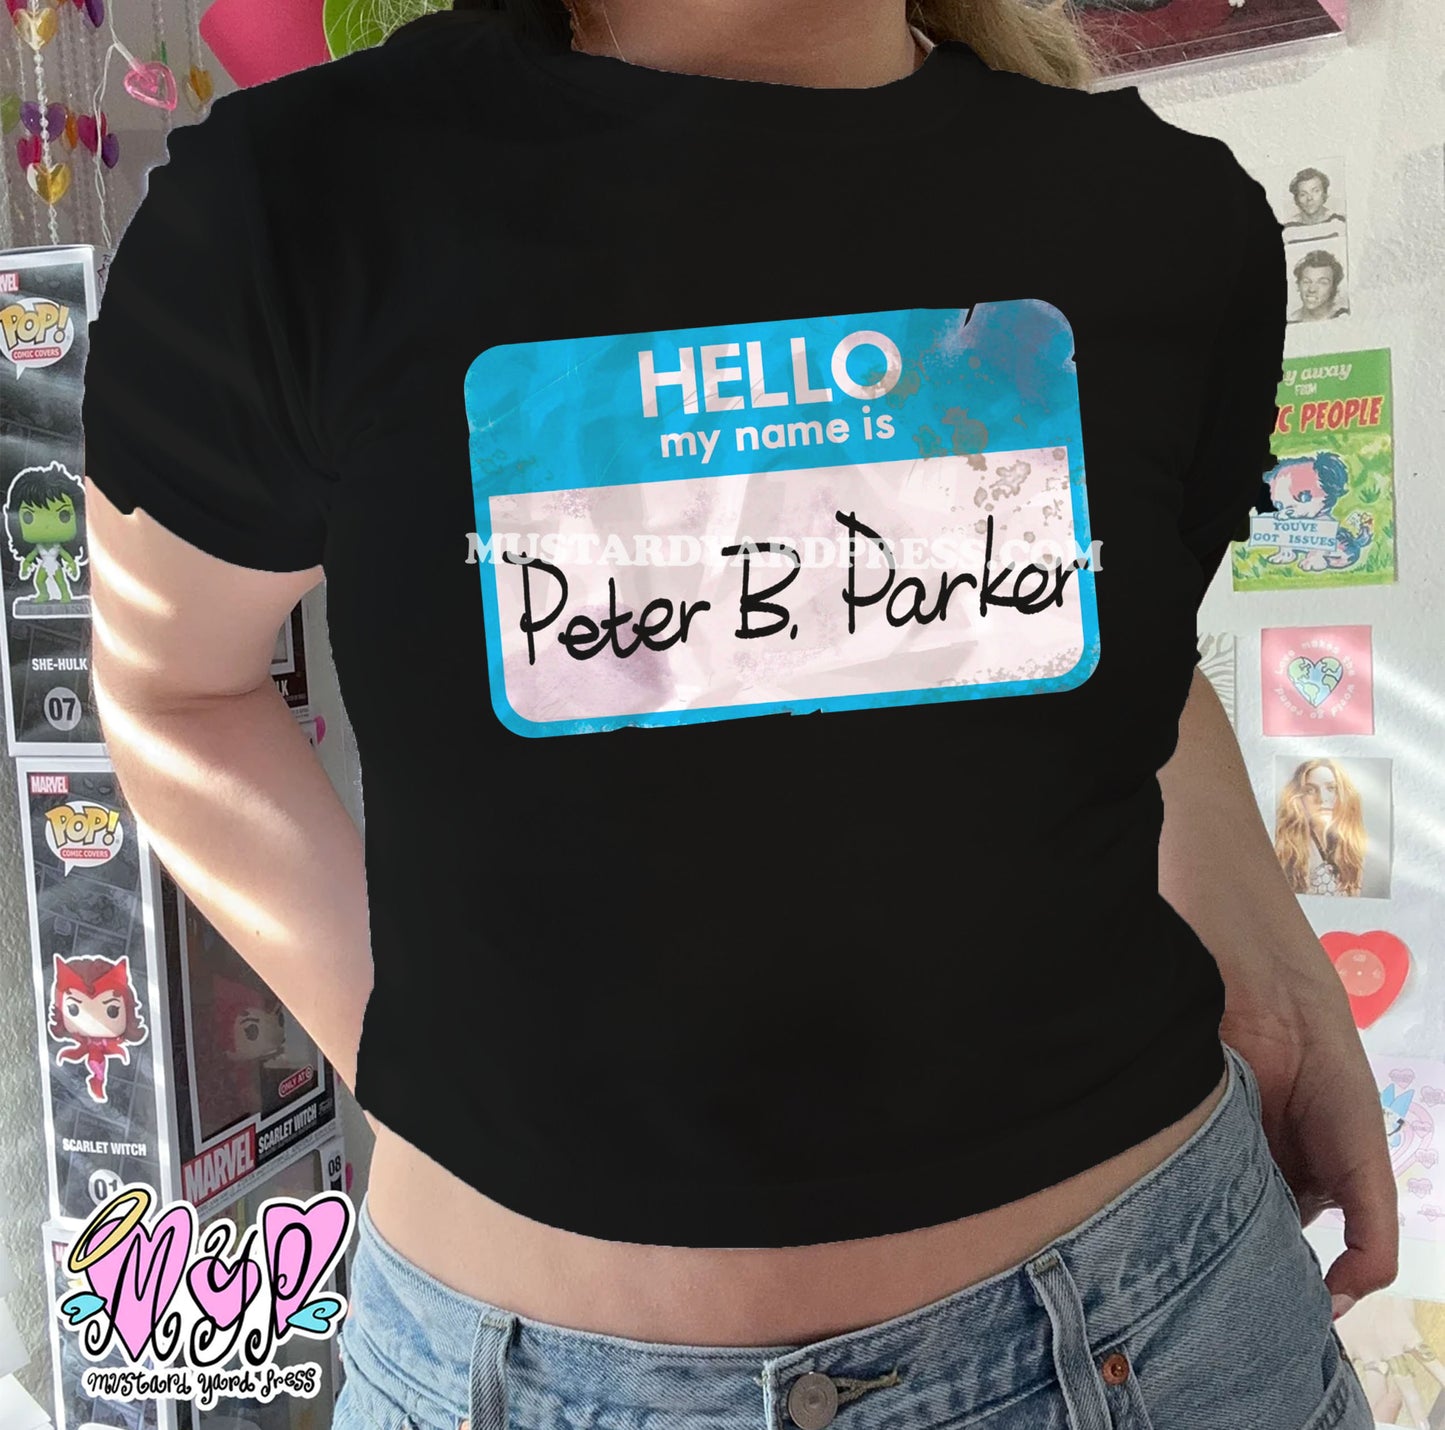 peter tag baby tee